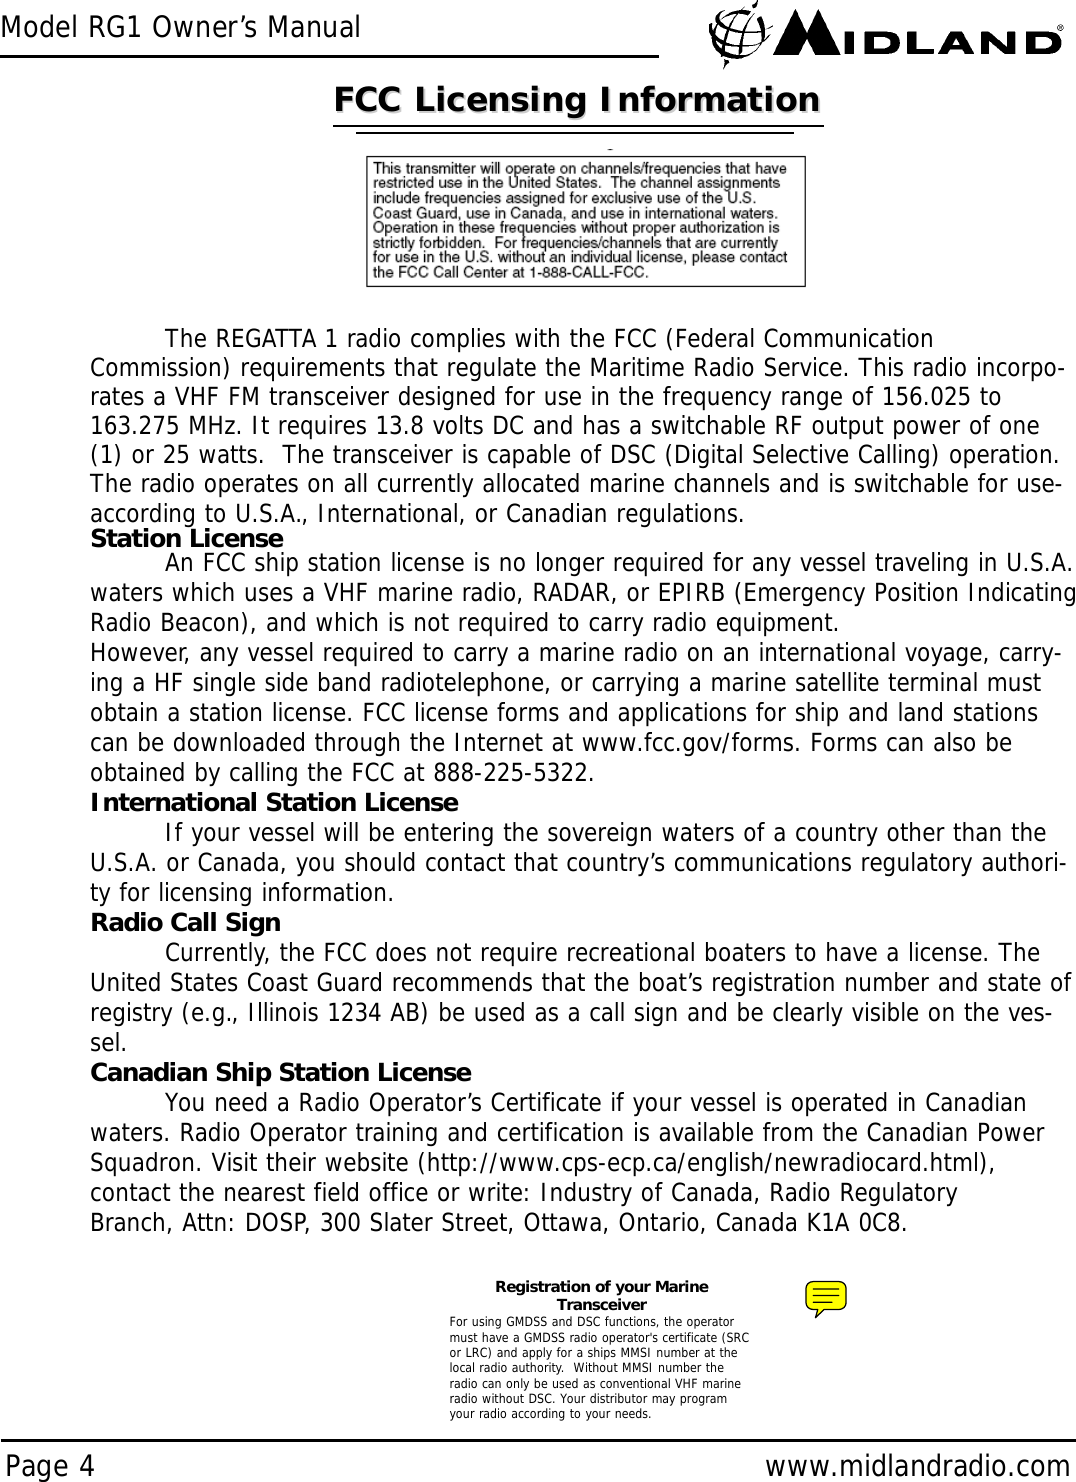 Model RG1 Owner’s ManualPage 4 www.midlandradio.comRegistration of your MarineTransceiverFor using GMDSS and DSC functions, the operatormust have a GMDSS radio operator&apos;s certificate (SRCor LRC) and apply for a ships MMSI number at thelocal radio authority.  Without MMSI number theradio can only be used as conventional VHF marineradio without DSC. Your distributor may programyour radio according to your needs.FCC Licensing InformationFCC Licensing InformationThe REGATTA 1 radio complies with the FCC (Federal CommunicationCommission) requirements that regulate the Maritime Radio Service. This radio incorpo-rates a VHF FM transceiver designed for use in the frequency range of 156.025 to163.275 MHz. It requires 13.8 volts DC and has a switchable RF output power of one(1) or 25 watts.  The transceiver is capable of DSC (Digital Selective Calling) operation.The radio operates on all currently allocated marine channels and is switchable for use-according to U.S.A., International, or Canadian regulations. Station LicenseAn FCC ship station license is no longer required for any vessel traveling in U.S.A.waters which uses a VHF marine radio, RADAR, or EPIRB (Emergency Position IndicatingRadio Beacon), and which is not required to carry radio equipment.However, any vessel required to carry a marine radio on an international voyage, carry-ing a HF single side band radiotelephone, or carrying a marine satellite terminal mustobtain a station license. FCC license forms and applications for ship and land stationscan be downloaded through the Internet at www.fcc.gov/forms. Forms can also beobtained by calling the FCC at 888-225-5322.International Station LicenseIf your vessel will be entering the sovereign waters of a country other than theU.S.A. or Canada, you should contact that country’s communications regulatory authori-ty for licensing information.Radio Call SignCurrently, the FCC does not require recreational boaters to have a license. TheUnited States Coast Guard recommends that the boat’s registration number and state ofregistry (e.g., Illinois 1234 AB) be used as a call sign and be clearly visible on the ves-sel.Canadian Ship Station LicenseYou need a Radio Operator’s Certificate if your vessel is operated in Canadianwaters. Radio Operator training and certification is available from the Canadian PowerSquadron. Visit their website (http://www.cps-ecp.ca/english/newradiocard.html),contact the nearest field office or write: Industry of Canada, Radio RegulatoryBranch, Attn: DOSP, 300 Slater Street, Ottawa, Ontario, Canada K1A 0C8.